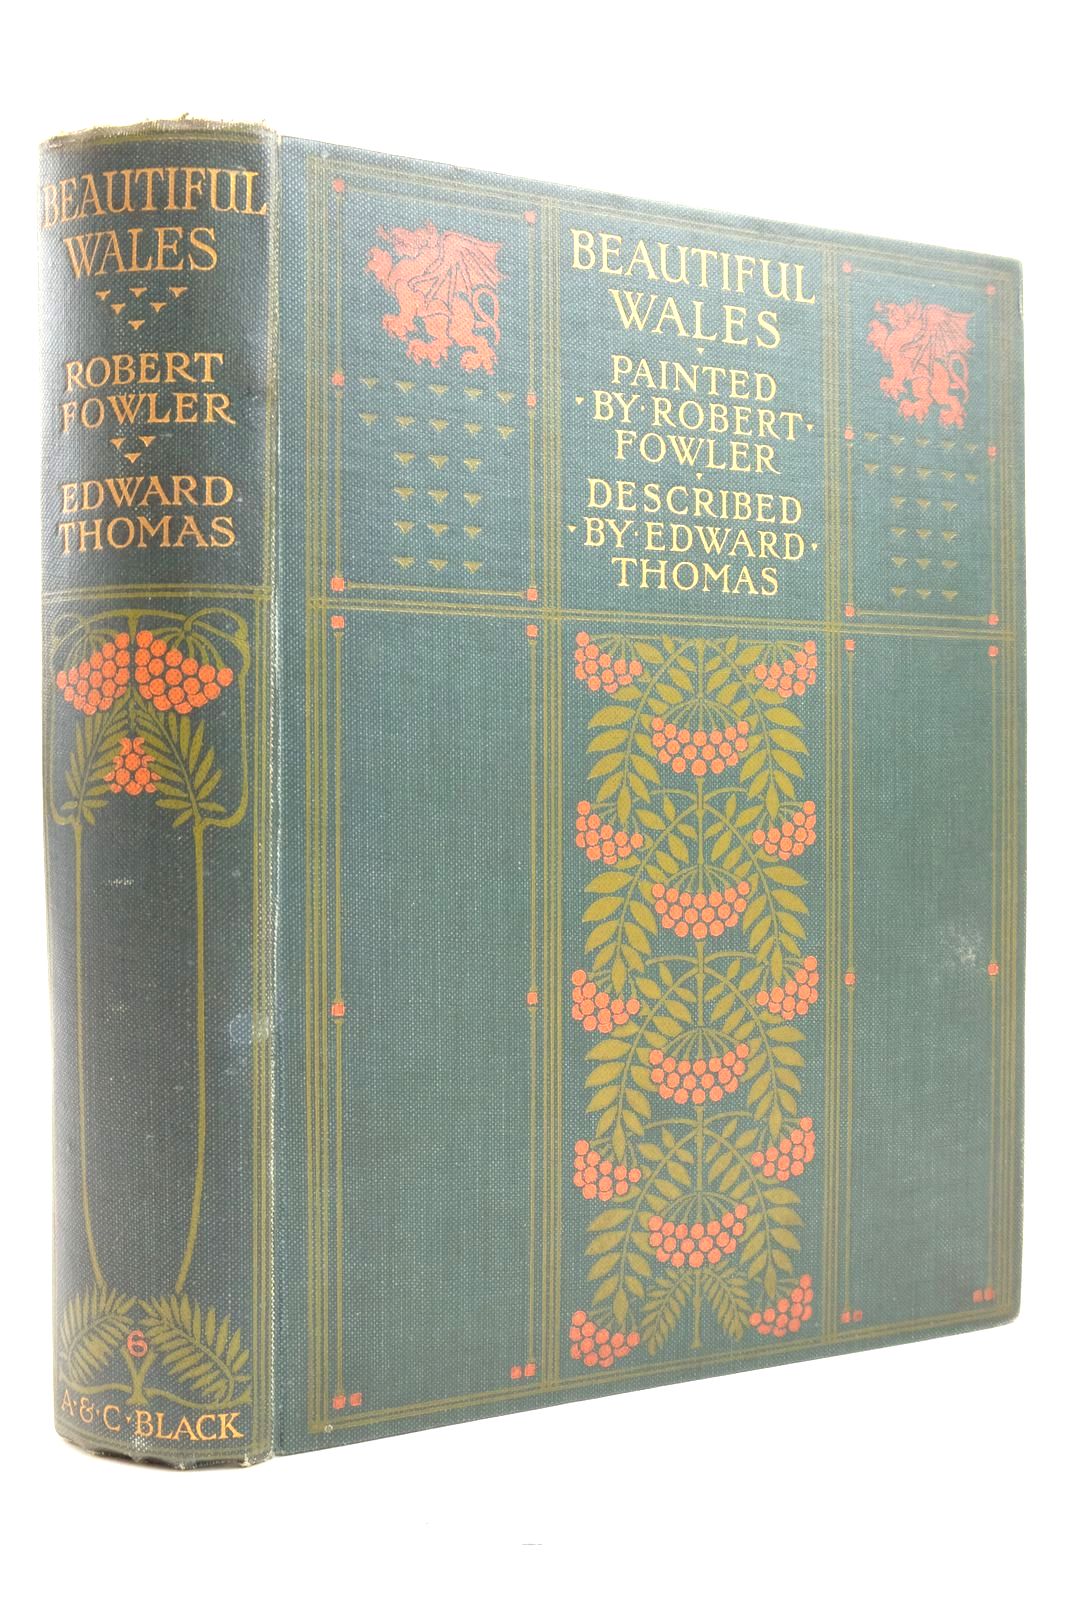 Photo of BEAUTIFUL WALES written by Thomas, Edward illustrated by Fowler, Robert published by A. &amp; C. Black (STOCK CODE: 2137140)  for sale by Stella & Rose's Books